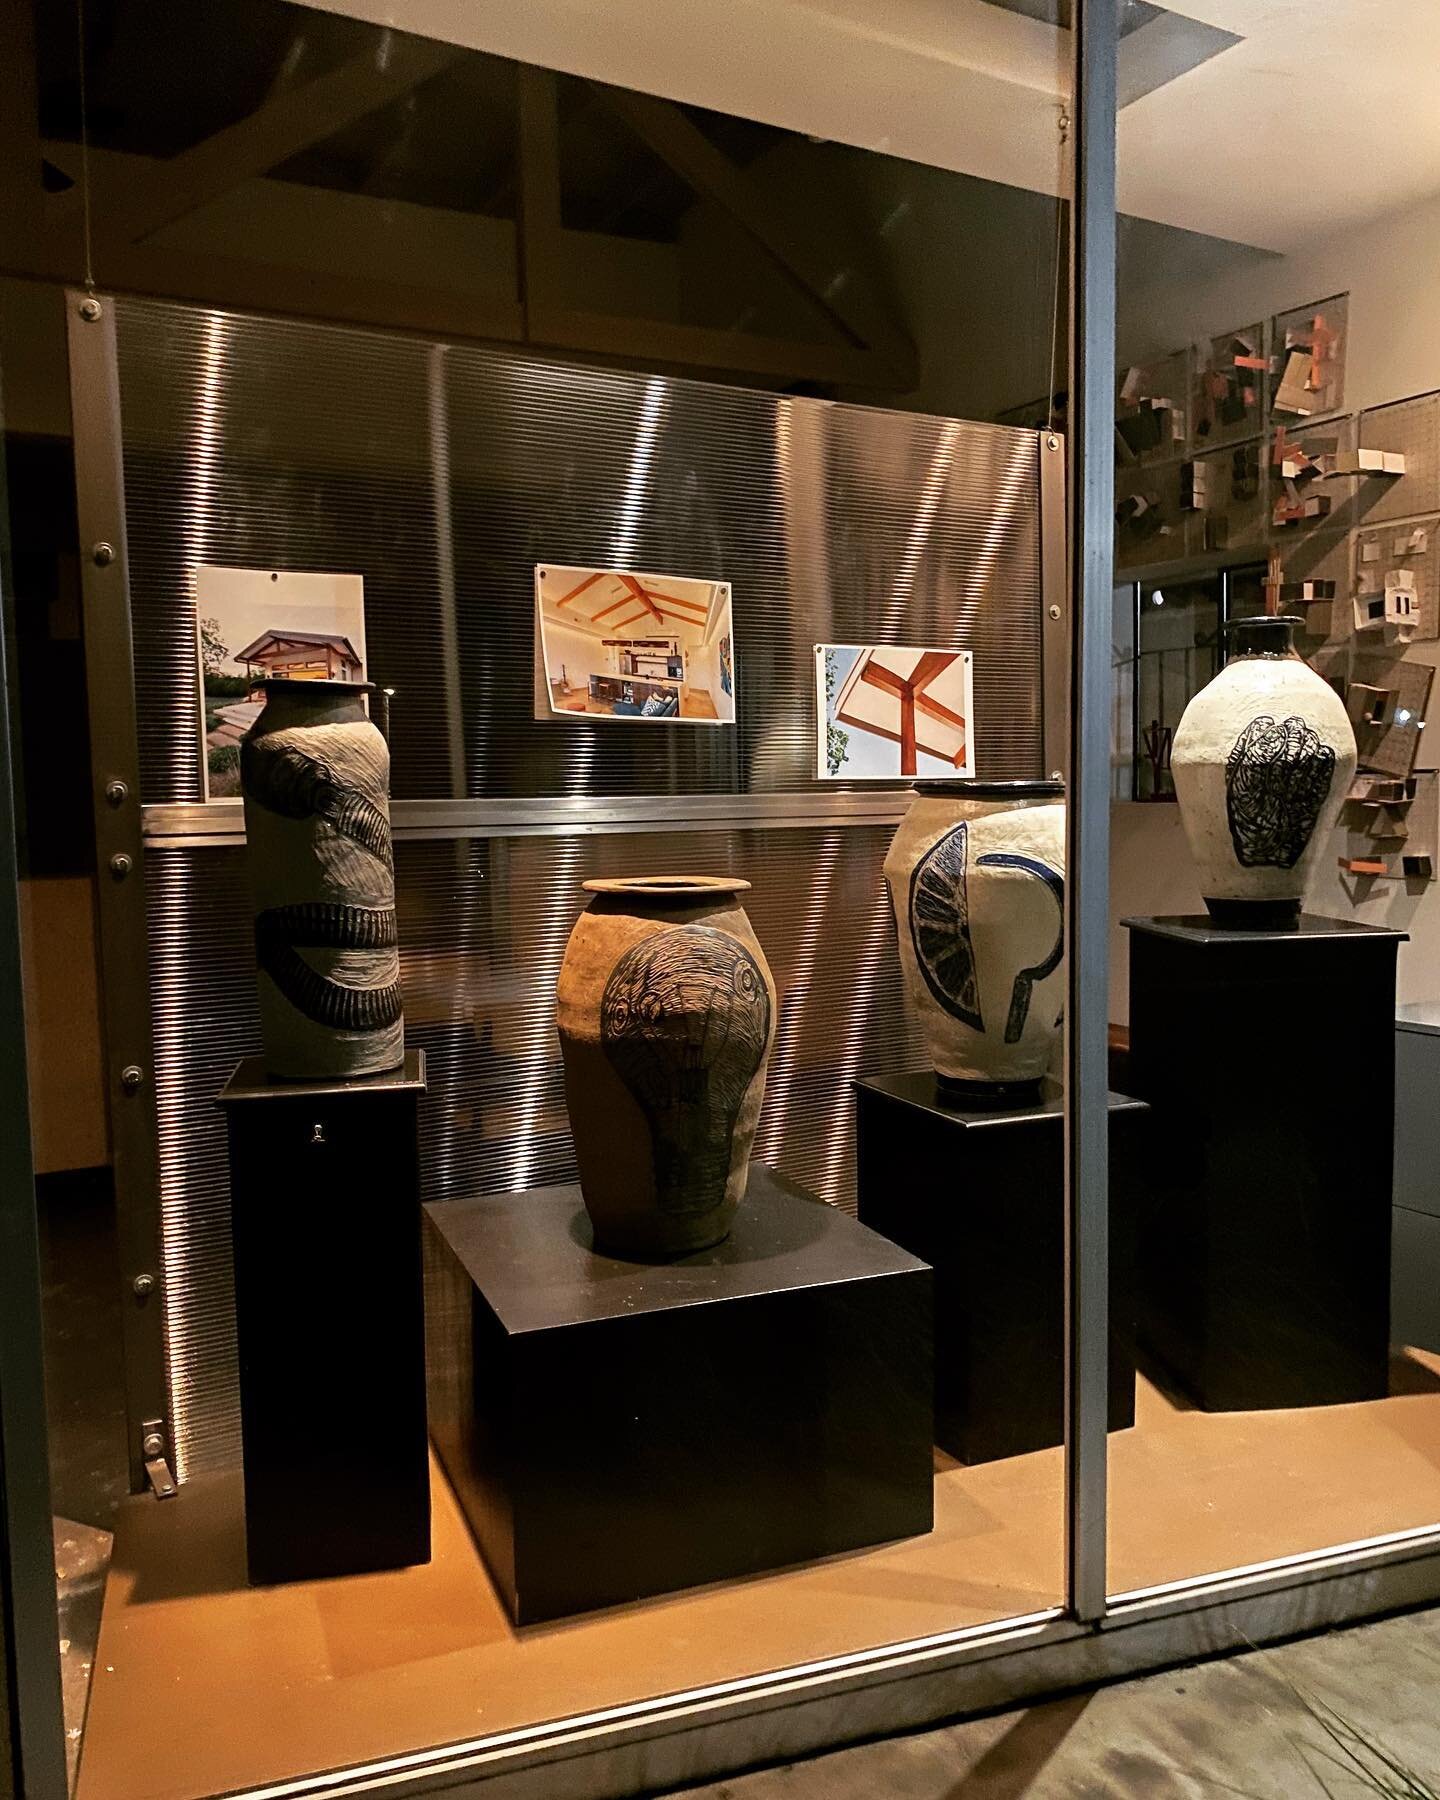 The storefront window at our 108 A&amp;D location has been refreshed.  Take a look at these new ceramic works by Todd Barricklow. @toddbarricklow

#larslangbergarchitects #larsarchitects #toddbarricklow #ceramics #108and #sebastopol #refresh